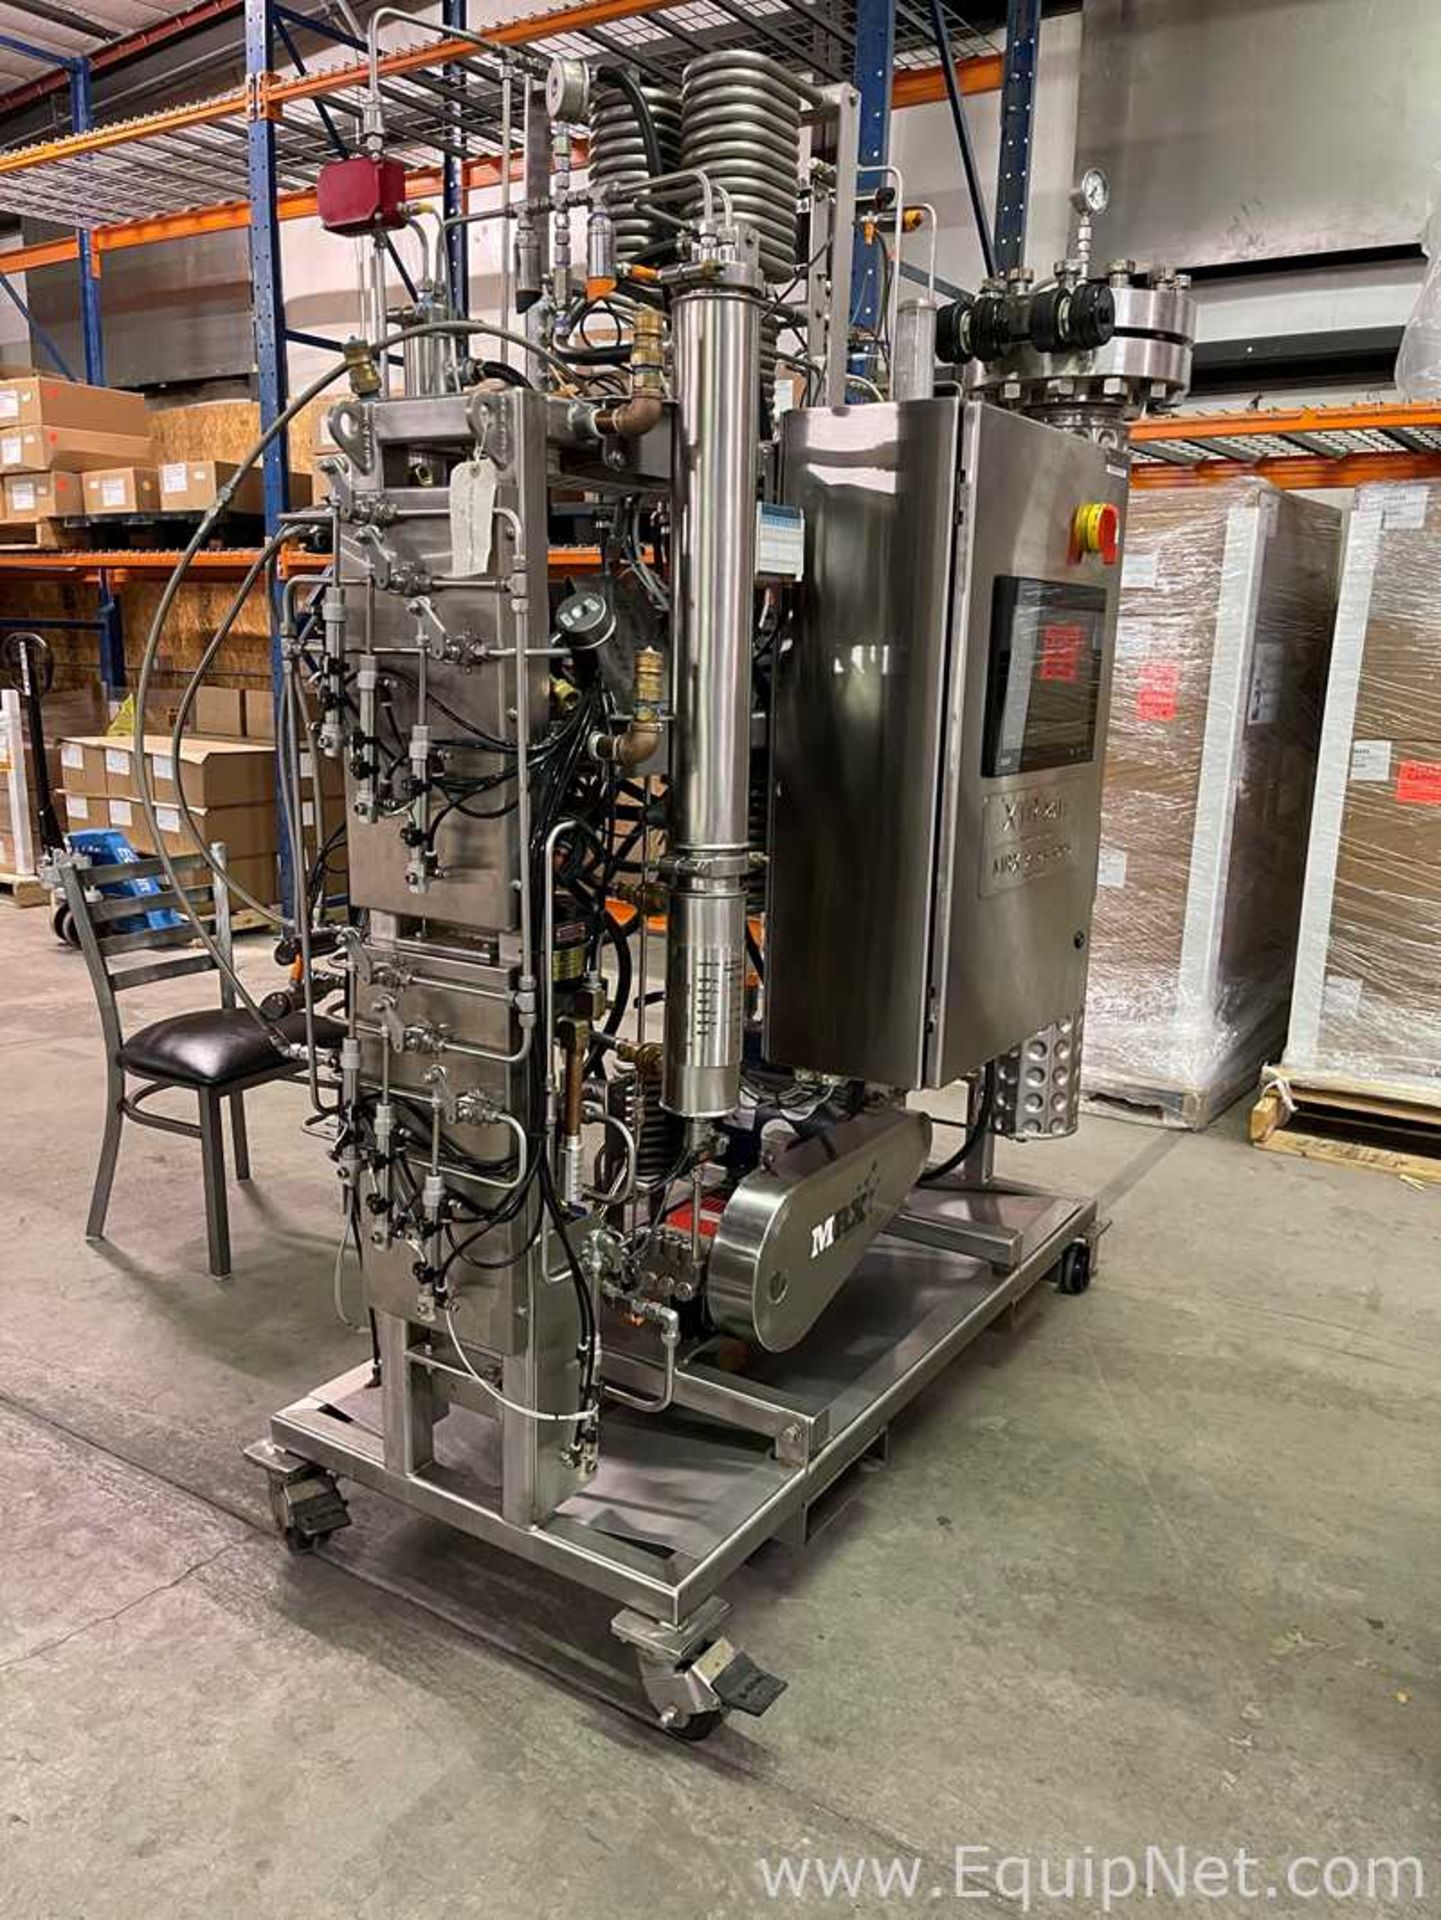 MRX Technologies XTR 20LE Supercritical CO2 Automated Extractor System - Image 2 of 10